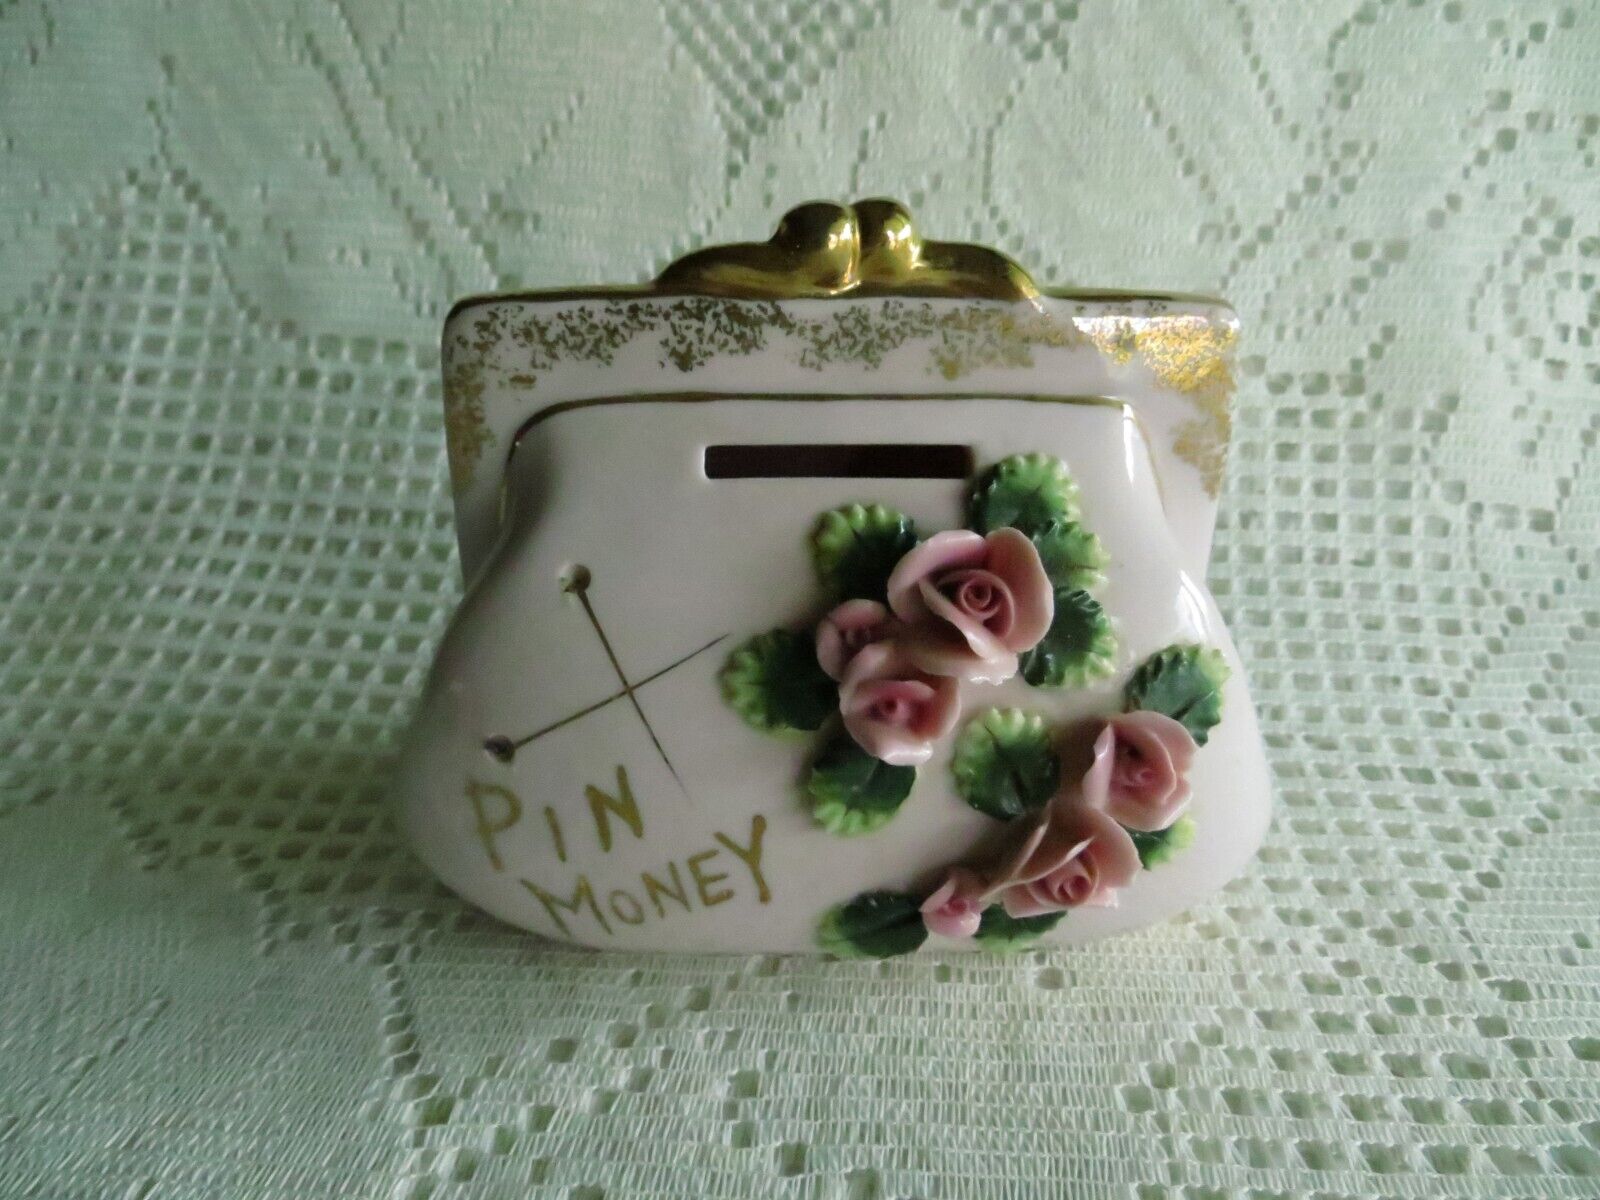 Pin Money Vintage Piggy Bank J-313, Pink And Gold With Roses